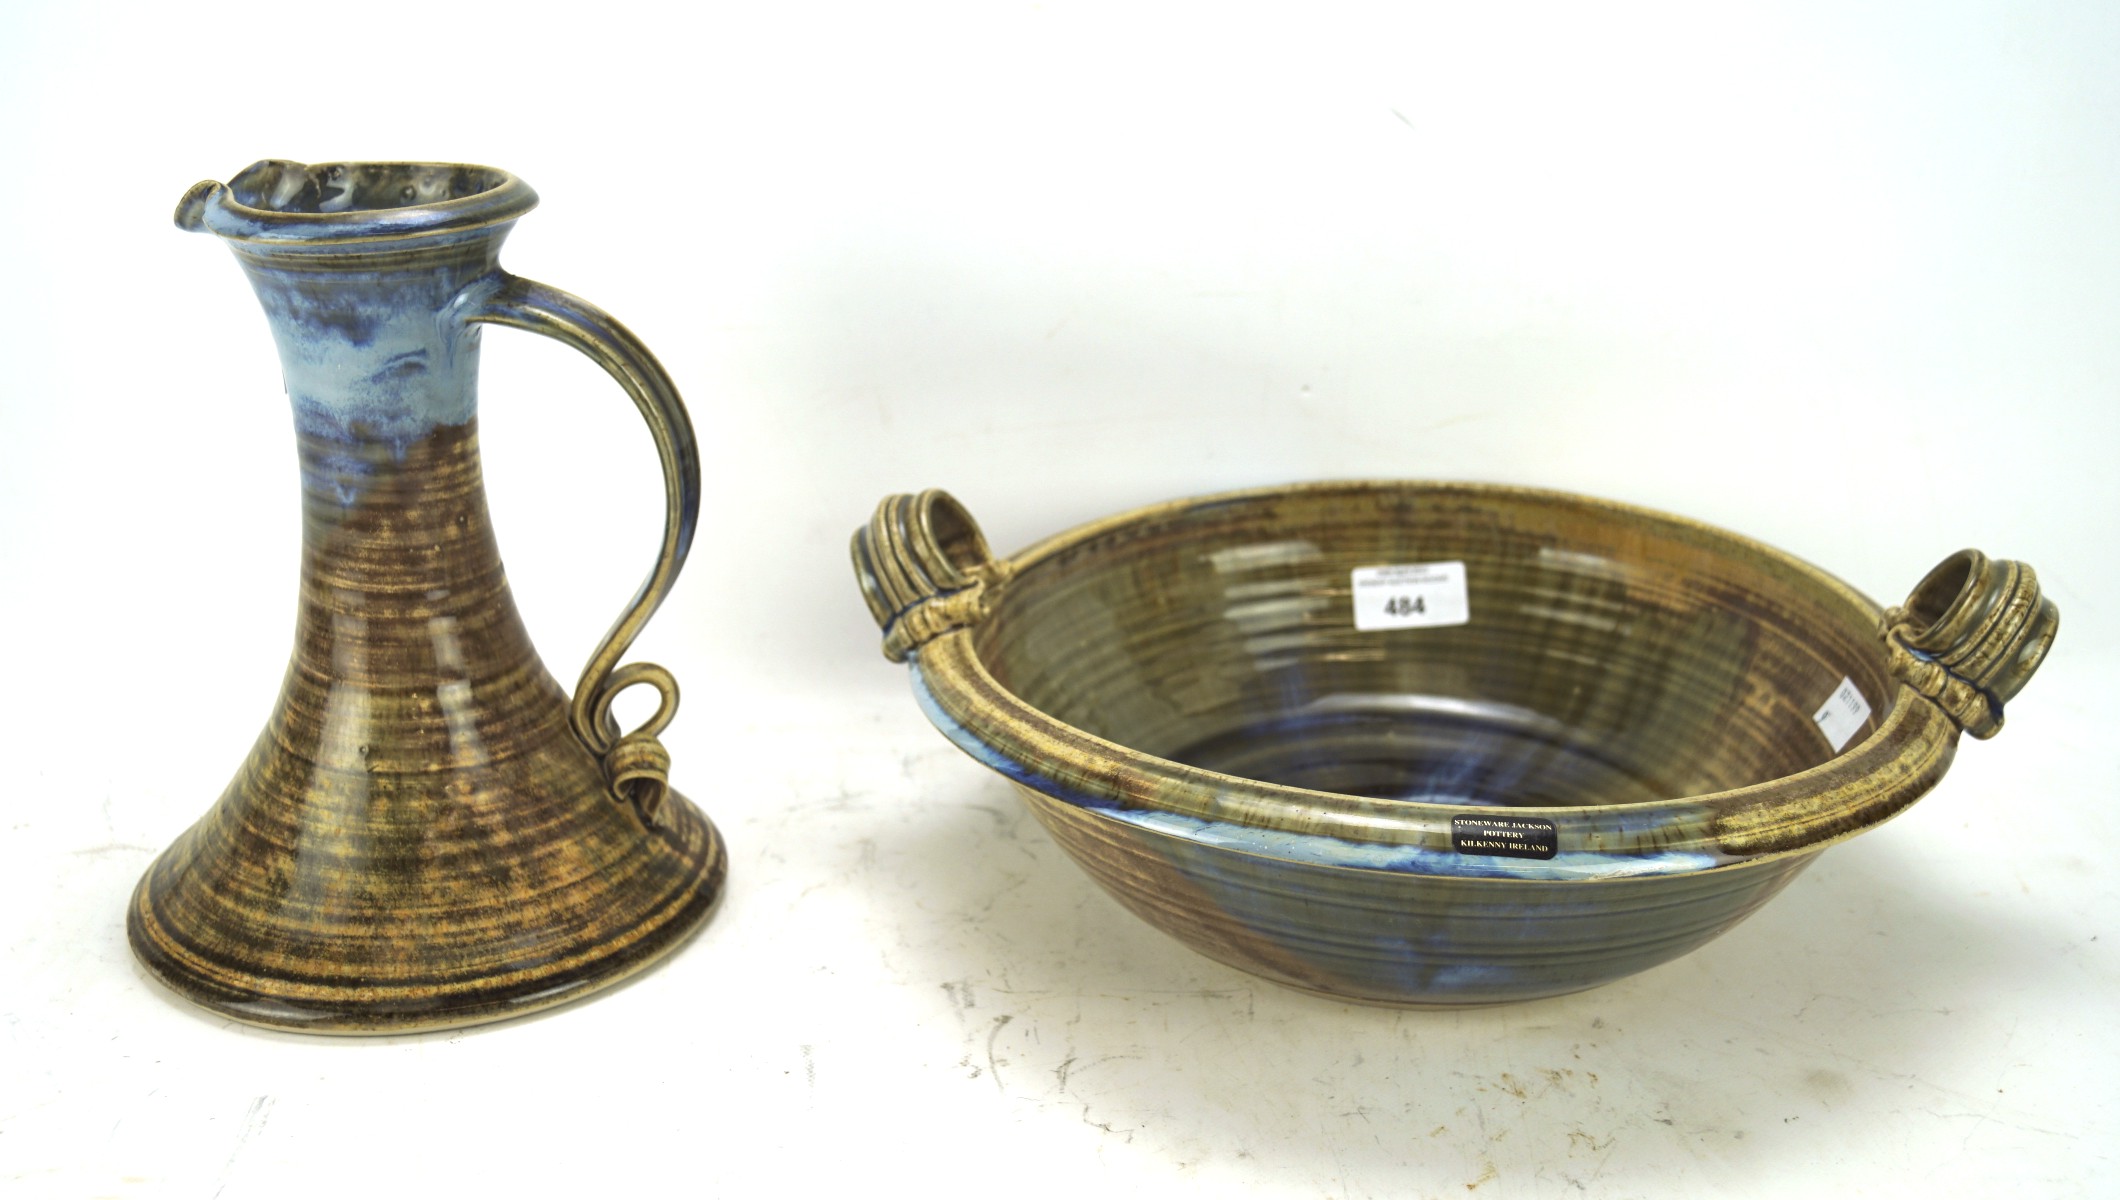 Two pieces of stoneware pottery from the Jackson Pottery Kilkenny Ireland,